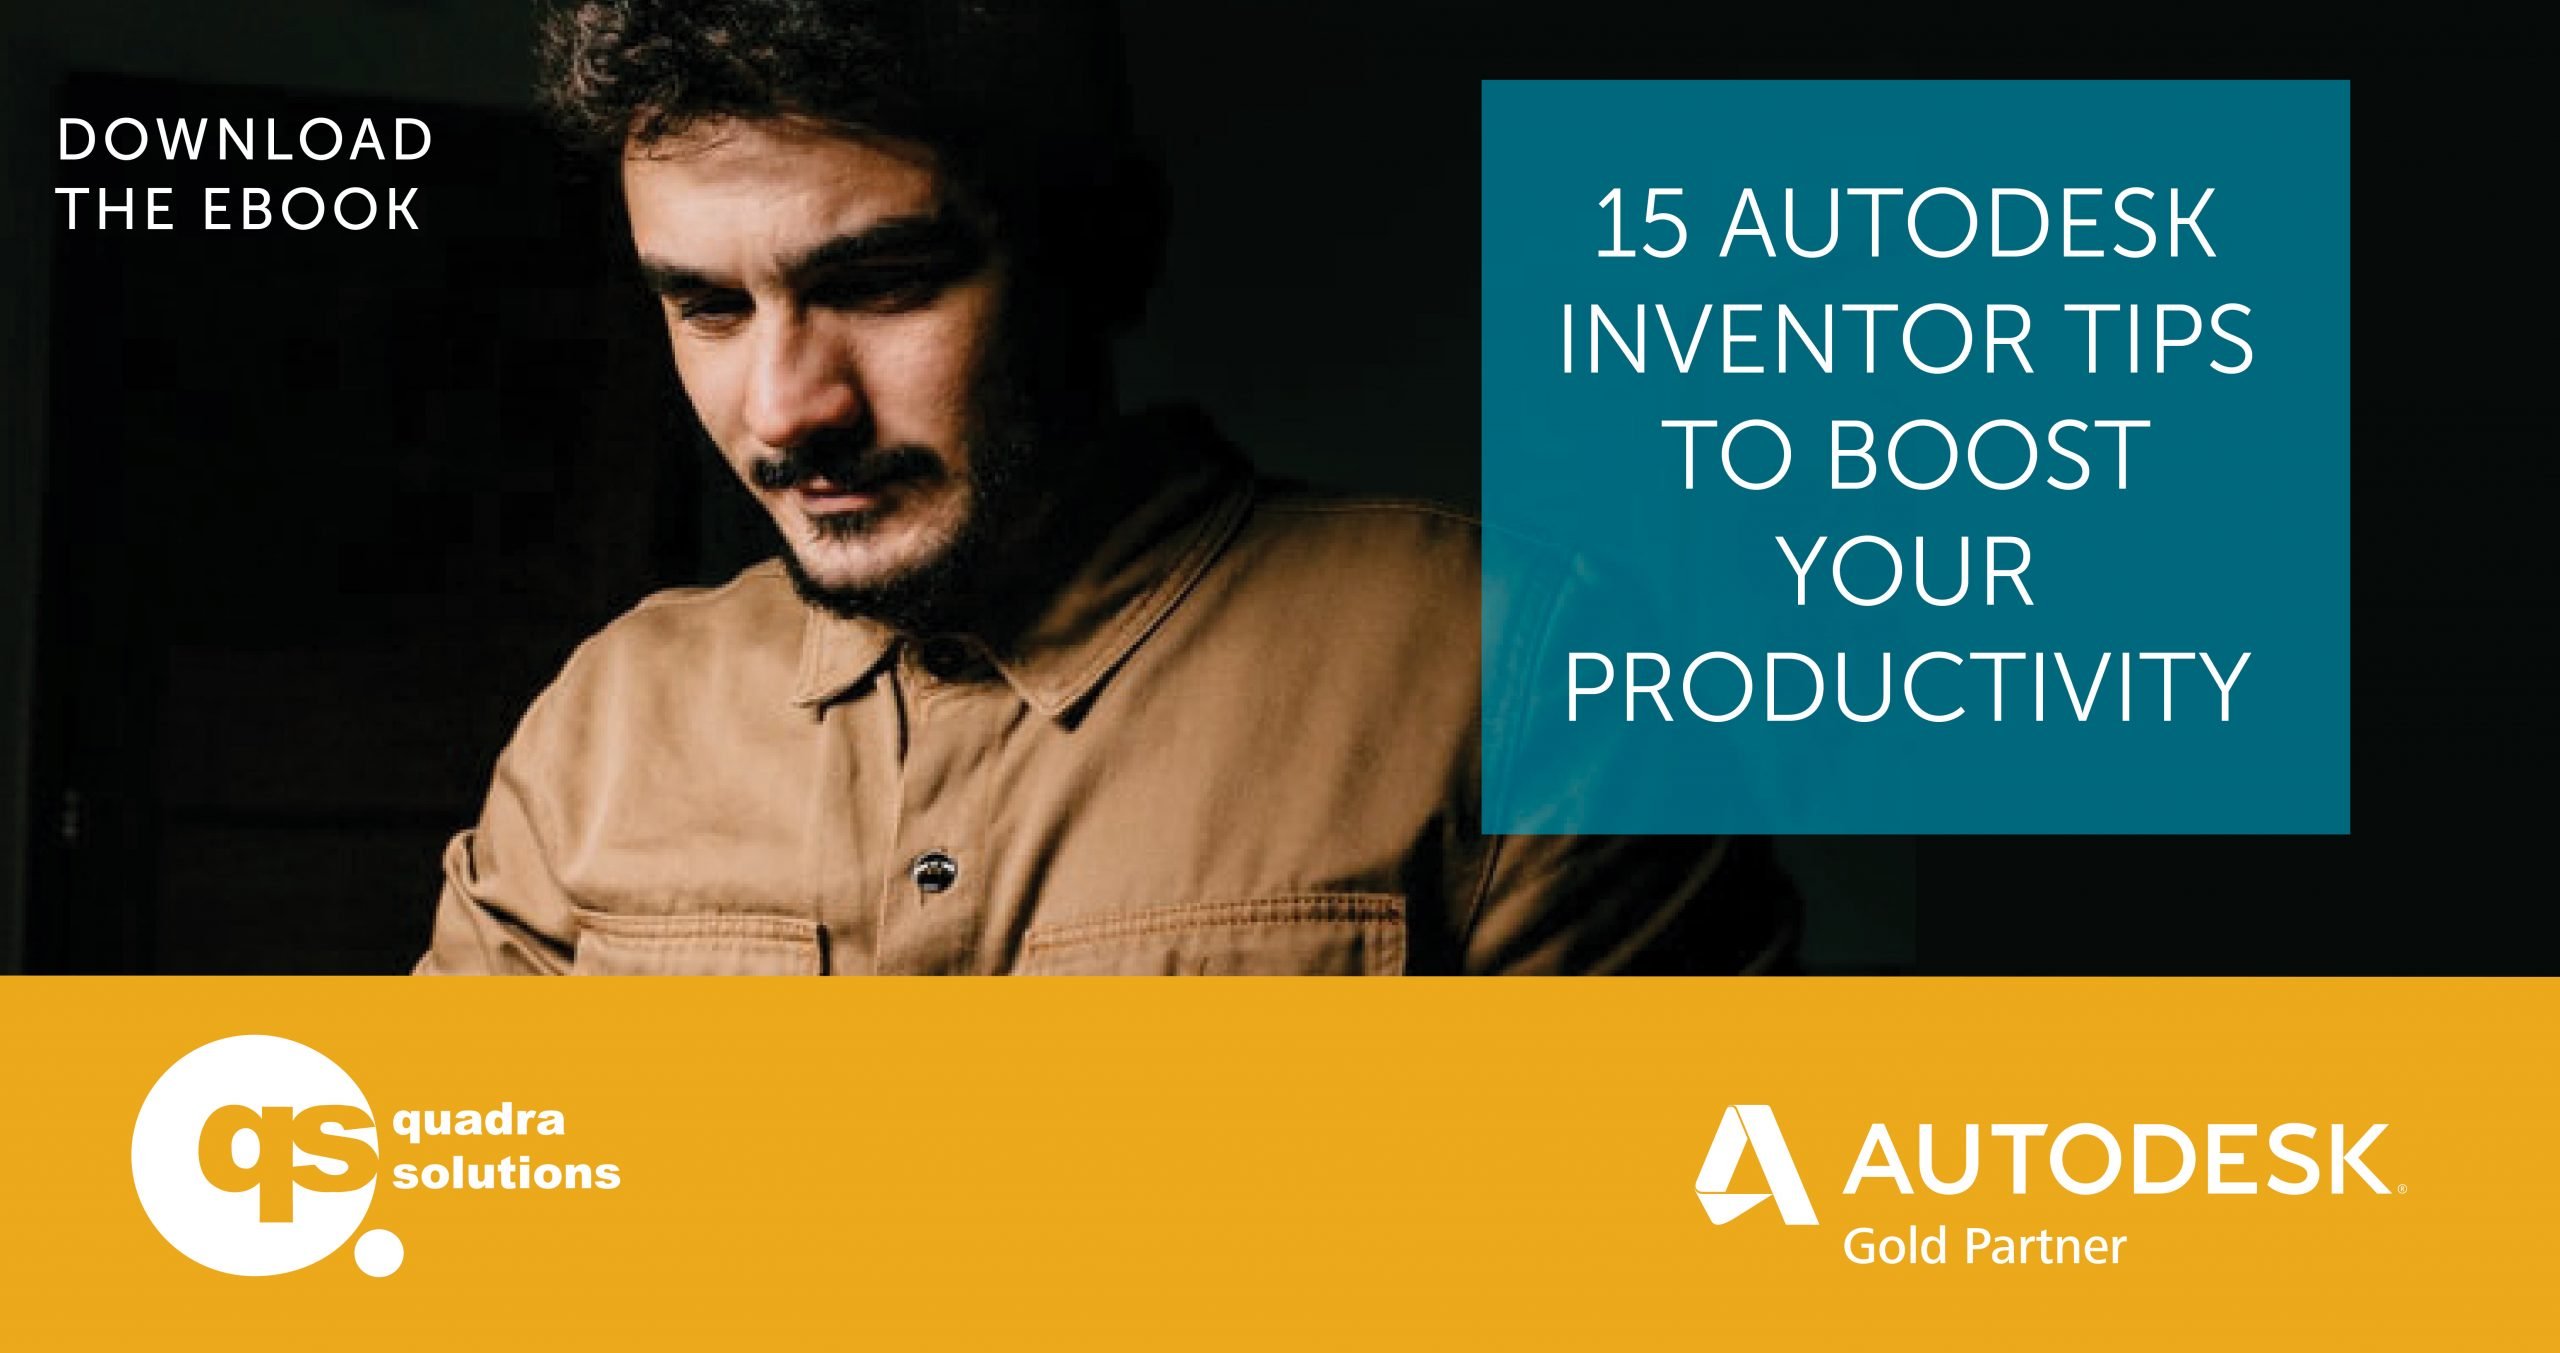 15 Autodesk Inventor Tips to Boost your Productivity right now! Download the ebook now